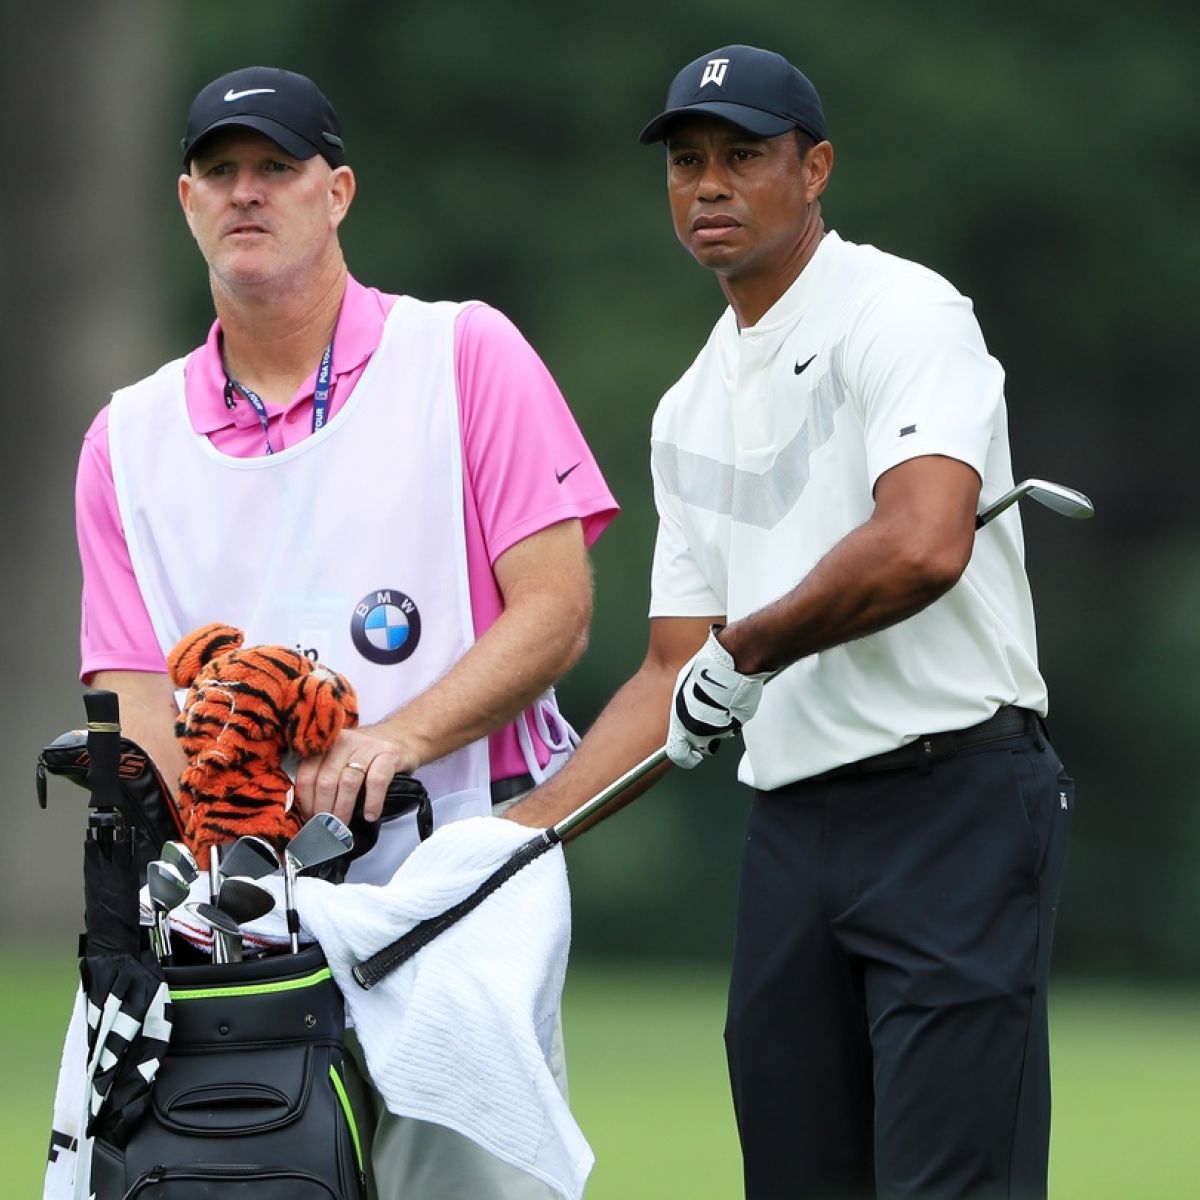 Spectator Sues Tiger Woods And His Caddie Over Incident In 2018